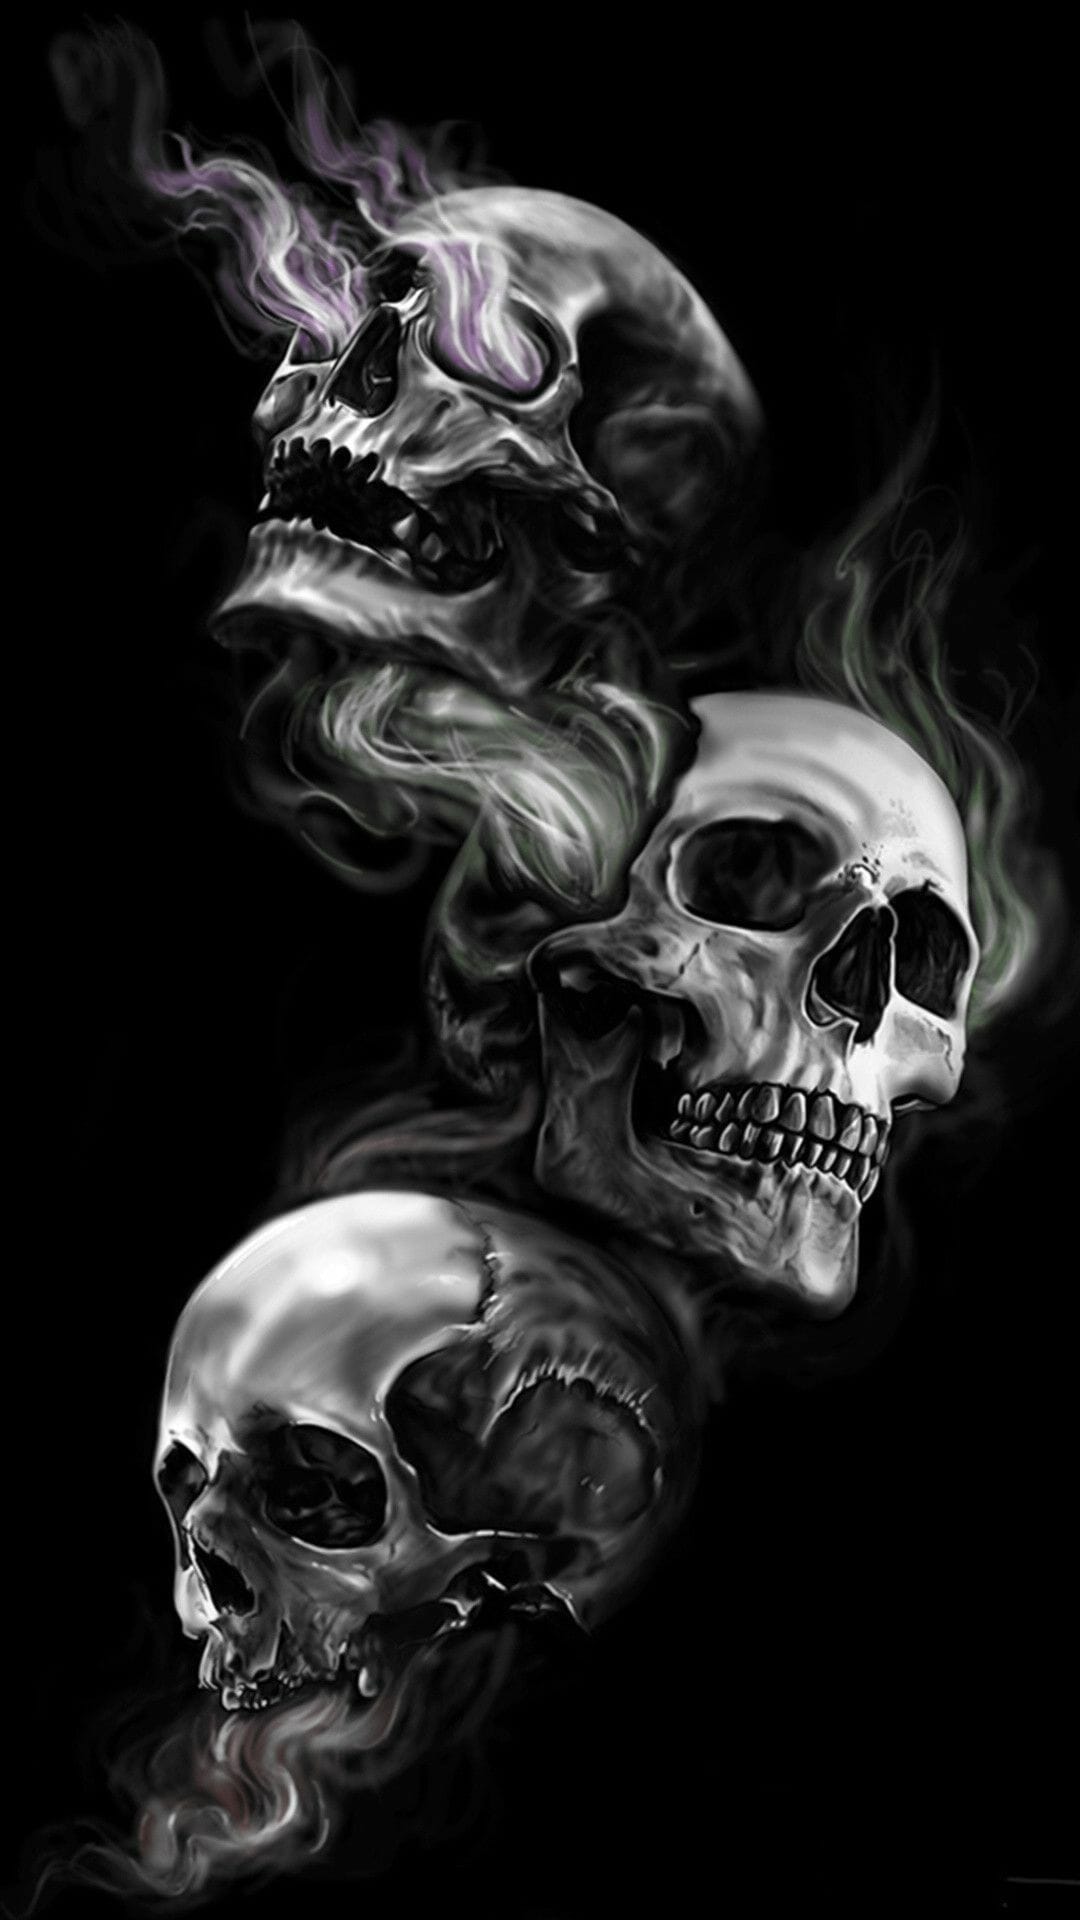 Skull Wallpaper Image (30 + Background Picture) / iPhone HD Wallpaper Background Download HD Wallpaper (Desktop Background / Android / iPhone) (1080p, 4k) (1080x1920)